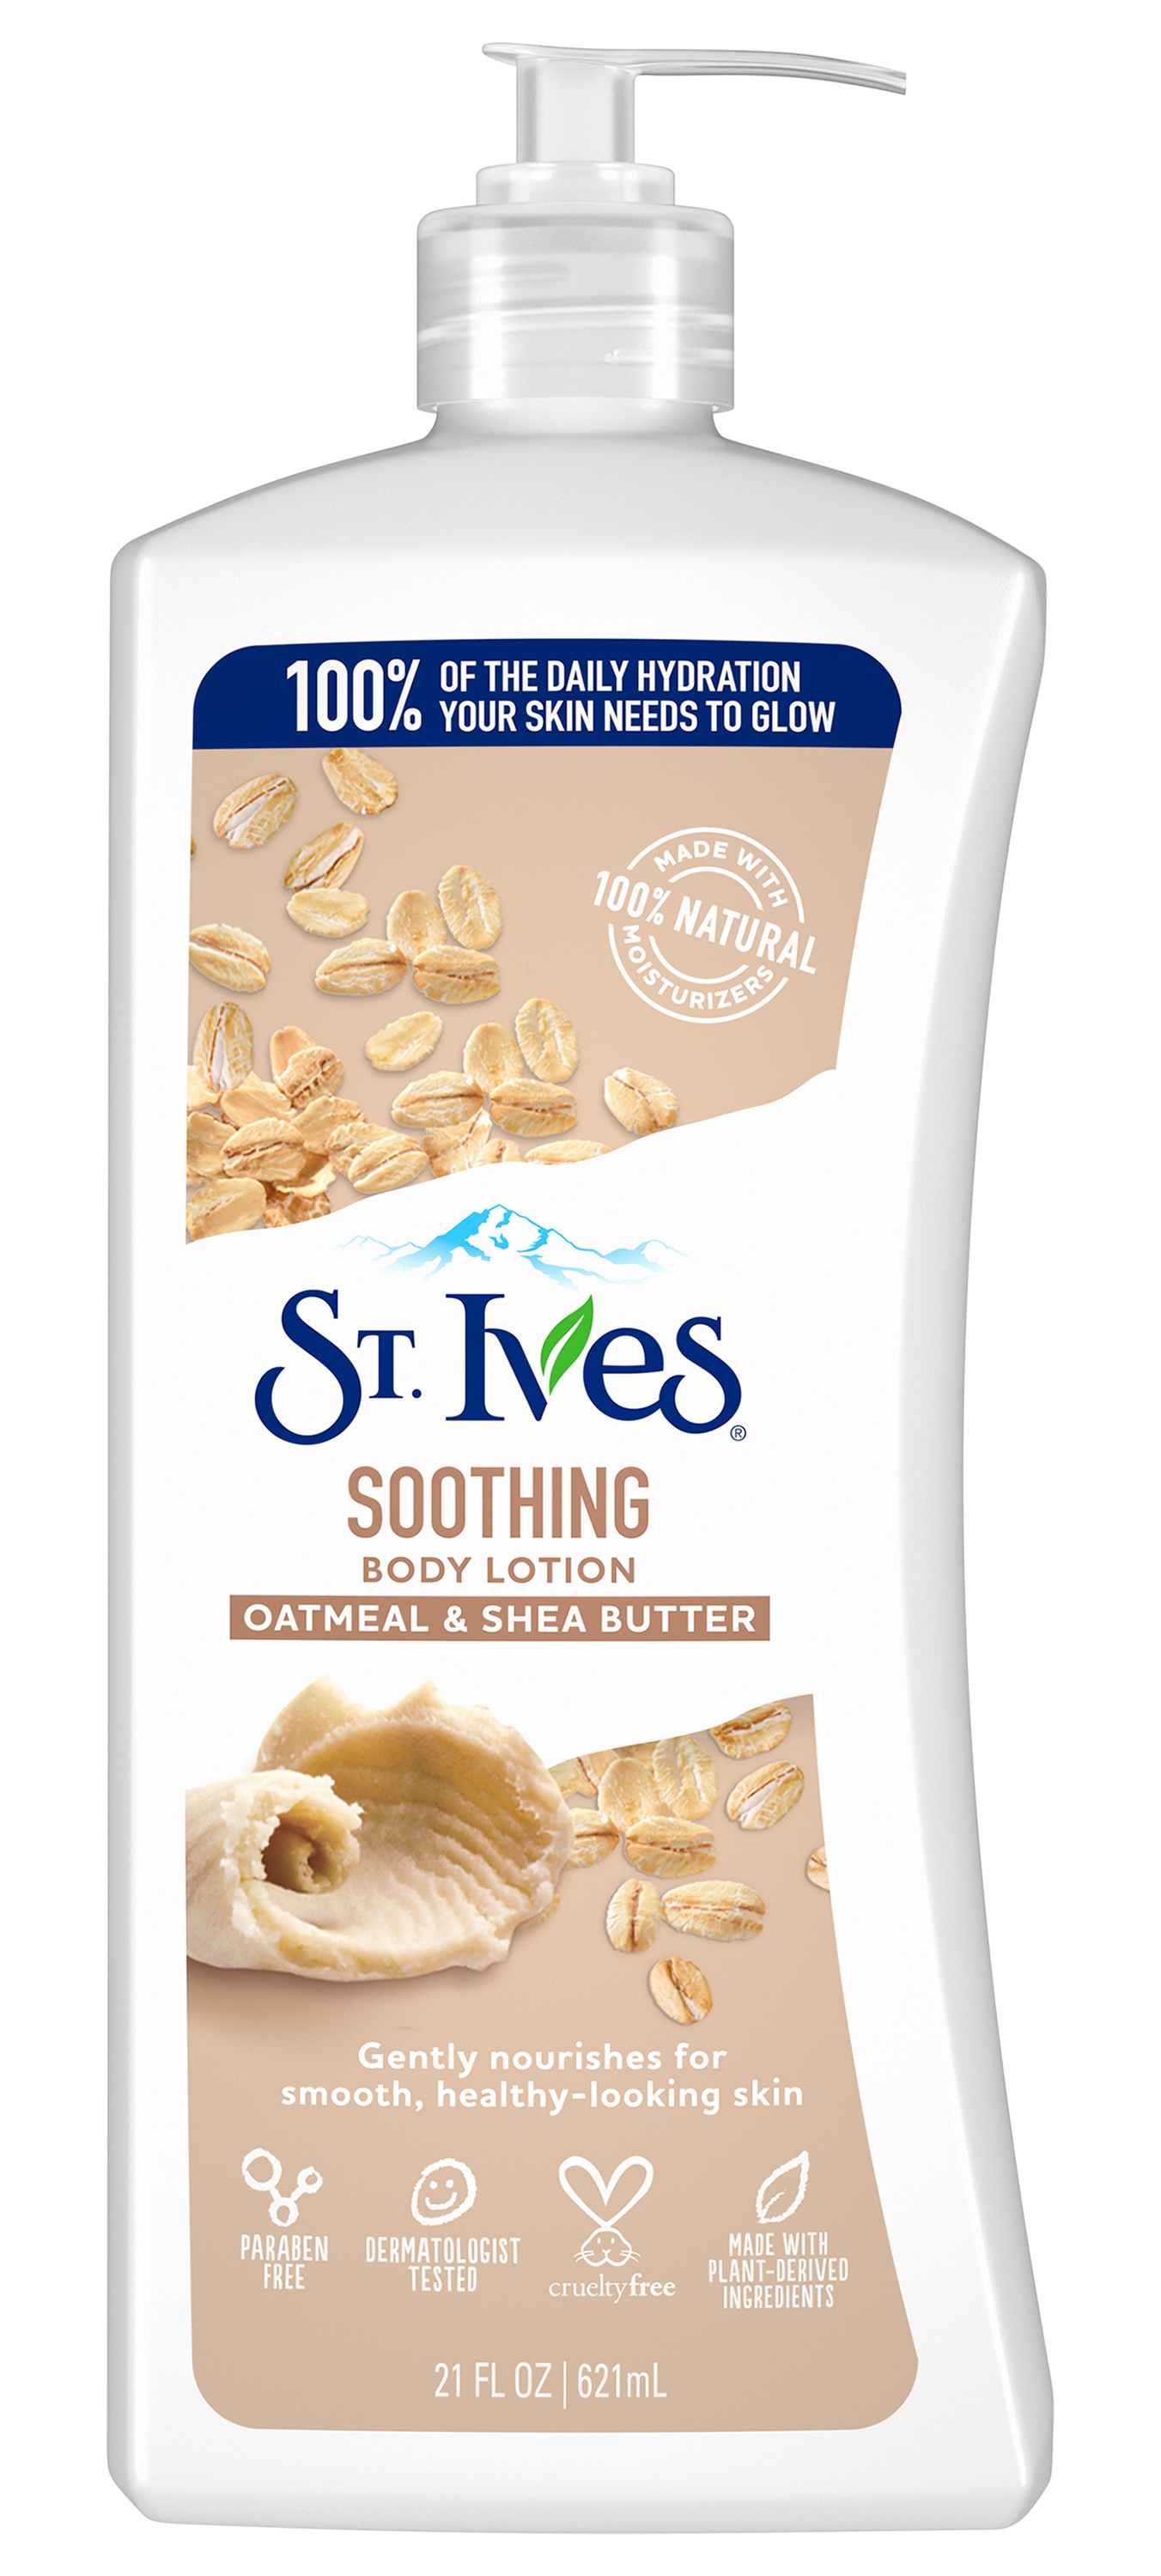 St Ives Soothing Oatmeal & Shea Butter Body Lotion